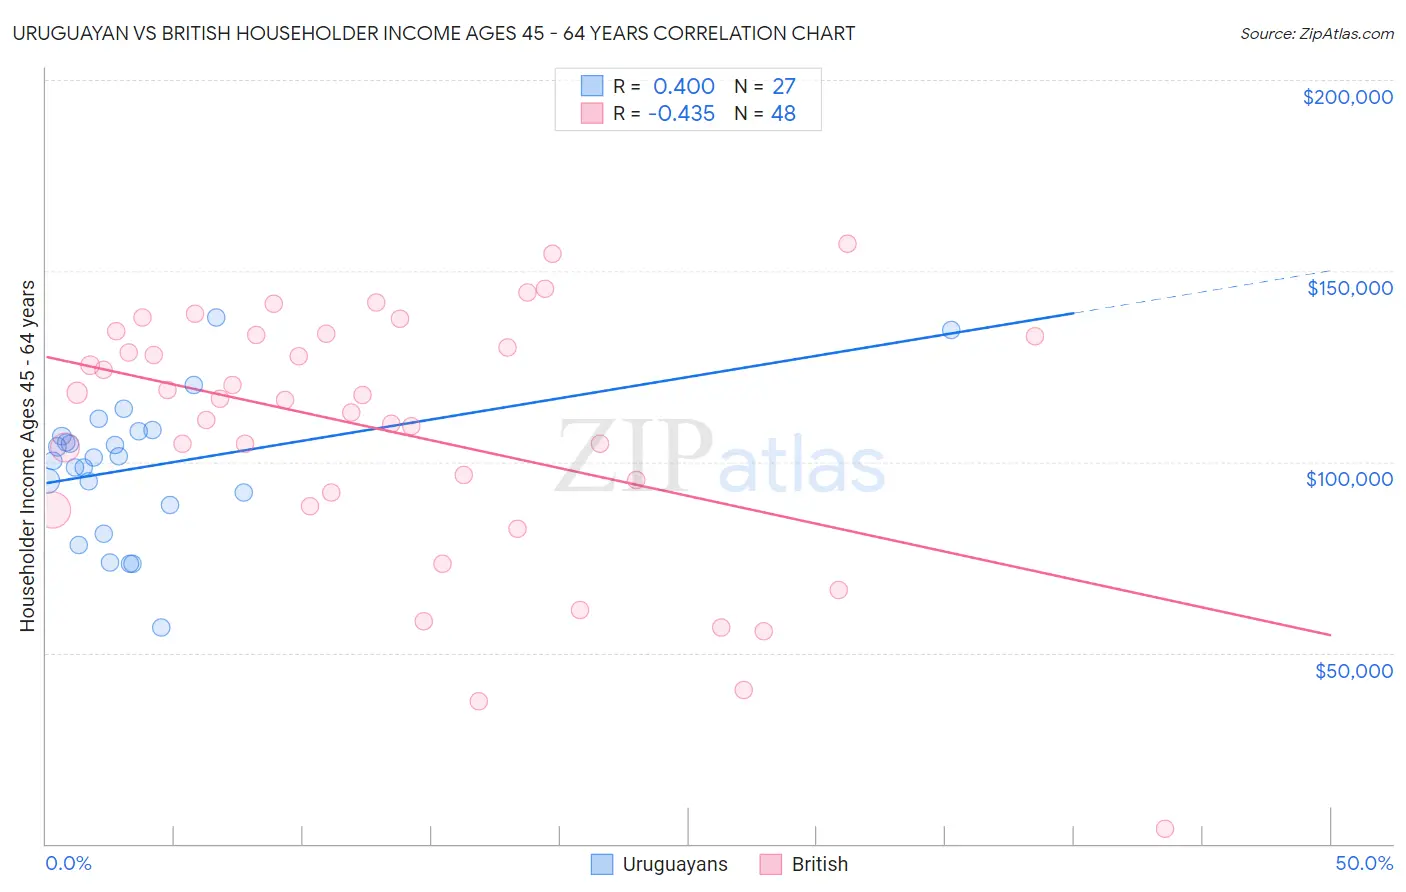 Uruguayan vs British Householder Income Ages 45 - 64 years